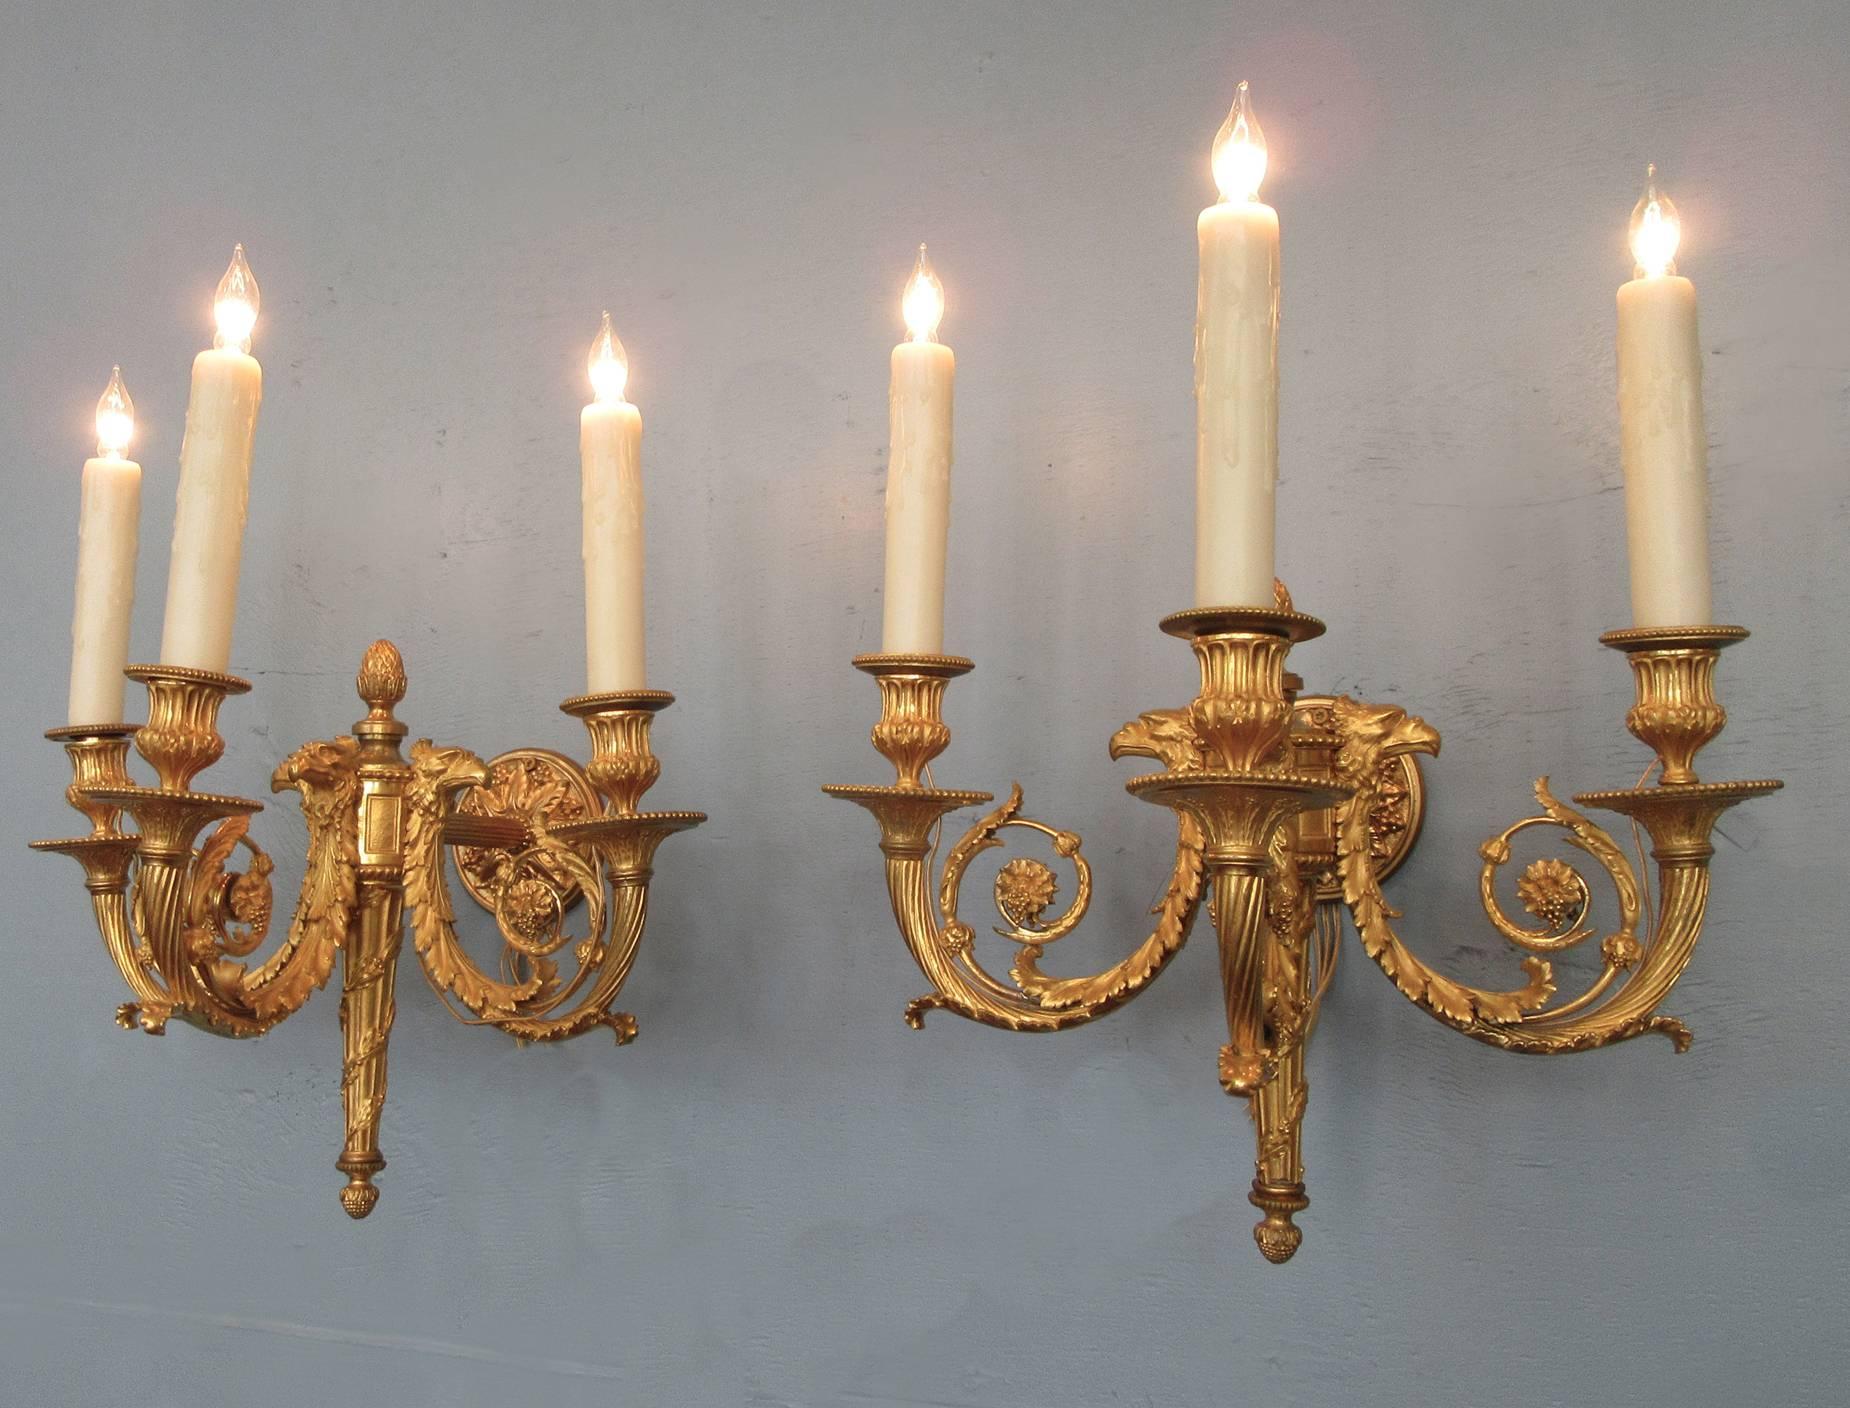 A large pair of exceptionally well cast 19th century French Empire bronze doré sconces, circa 1810, featuring quiver base with three candle arms, finely detailed eagle heads, foliate and grape motifs.